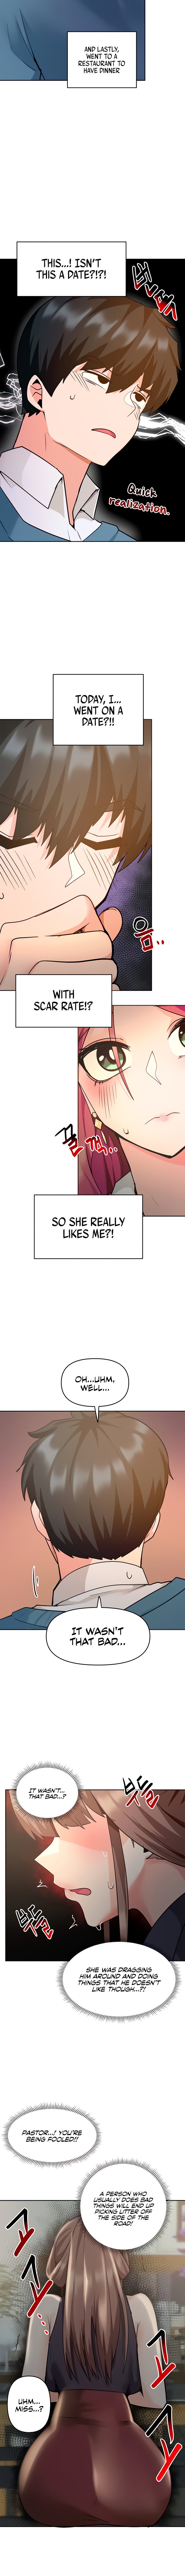 the-hypnosis-app-was-fake-chap-33-11